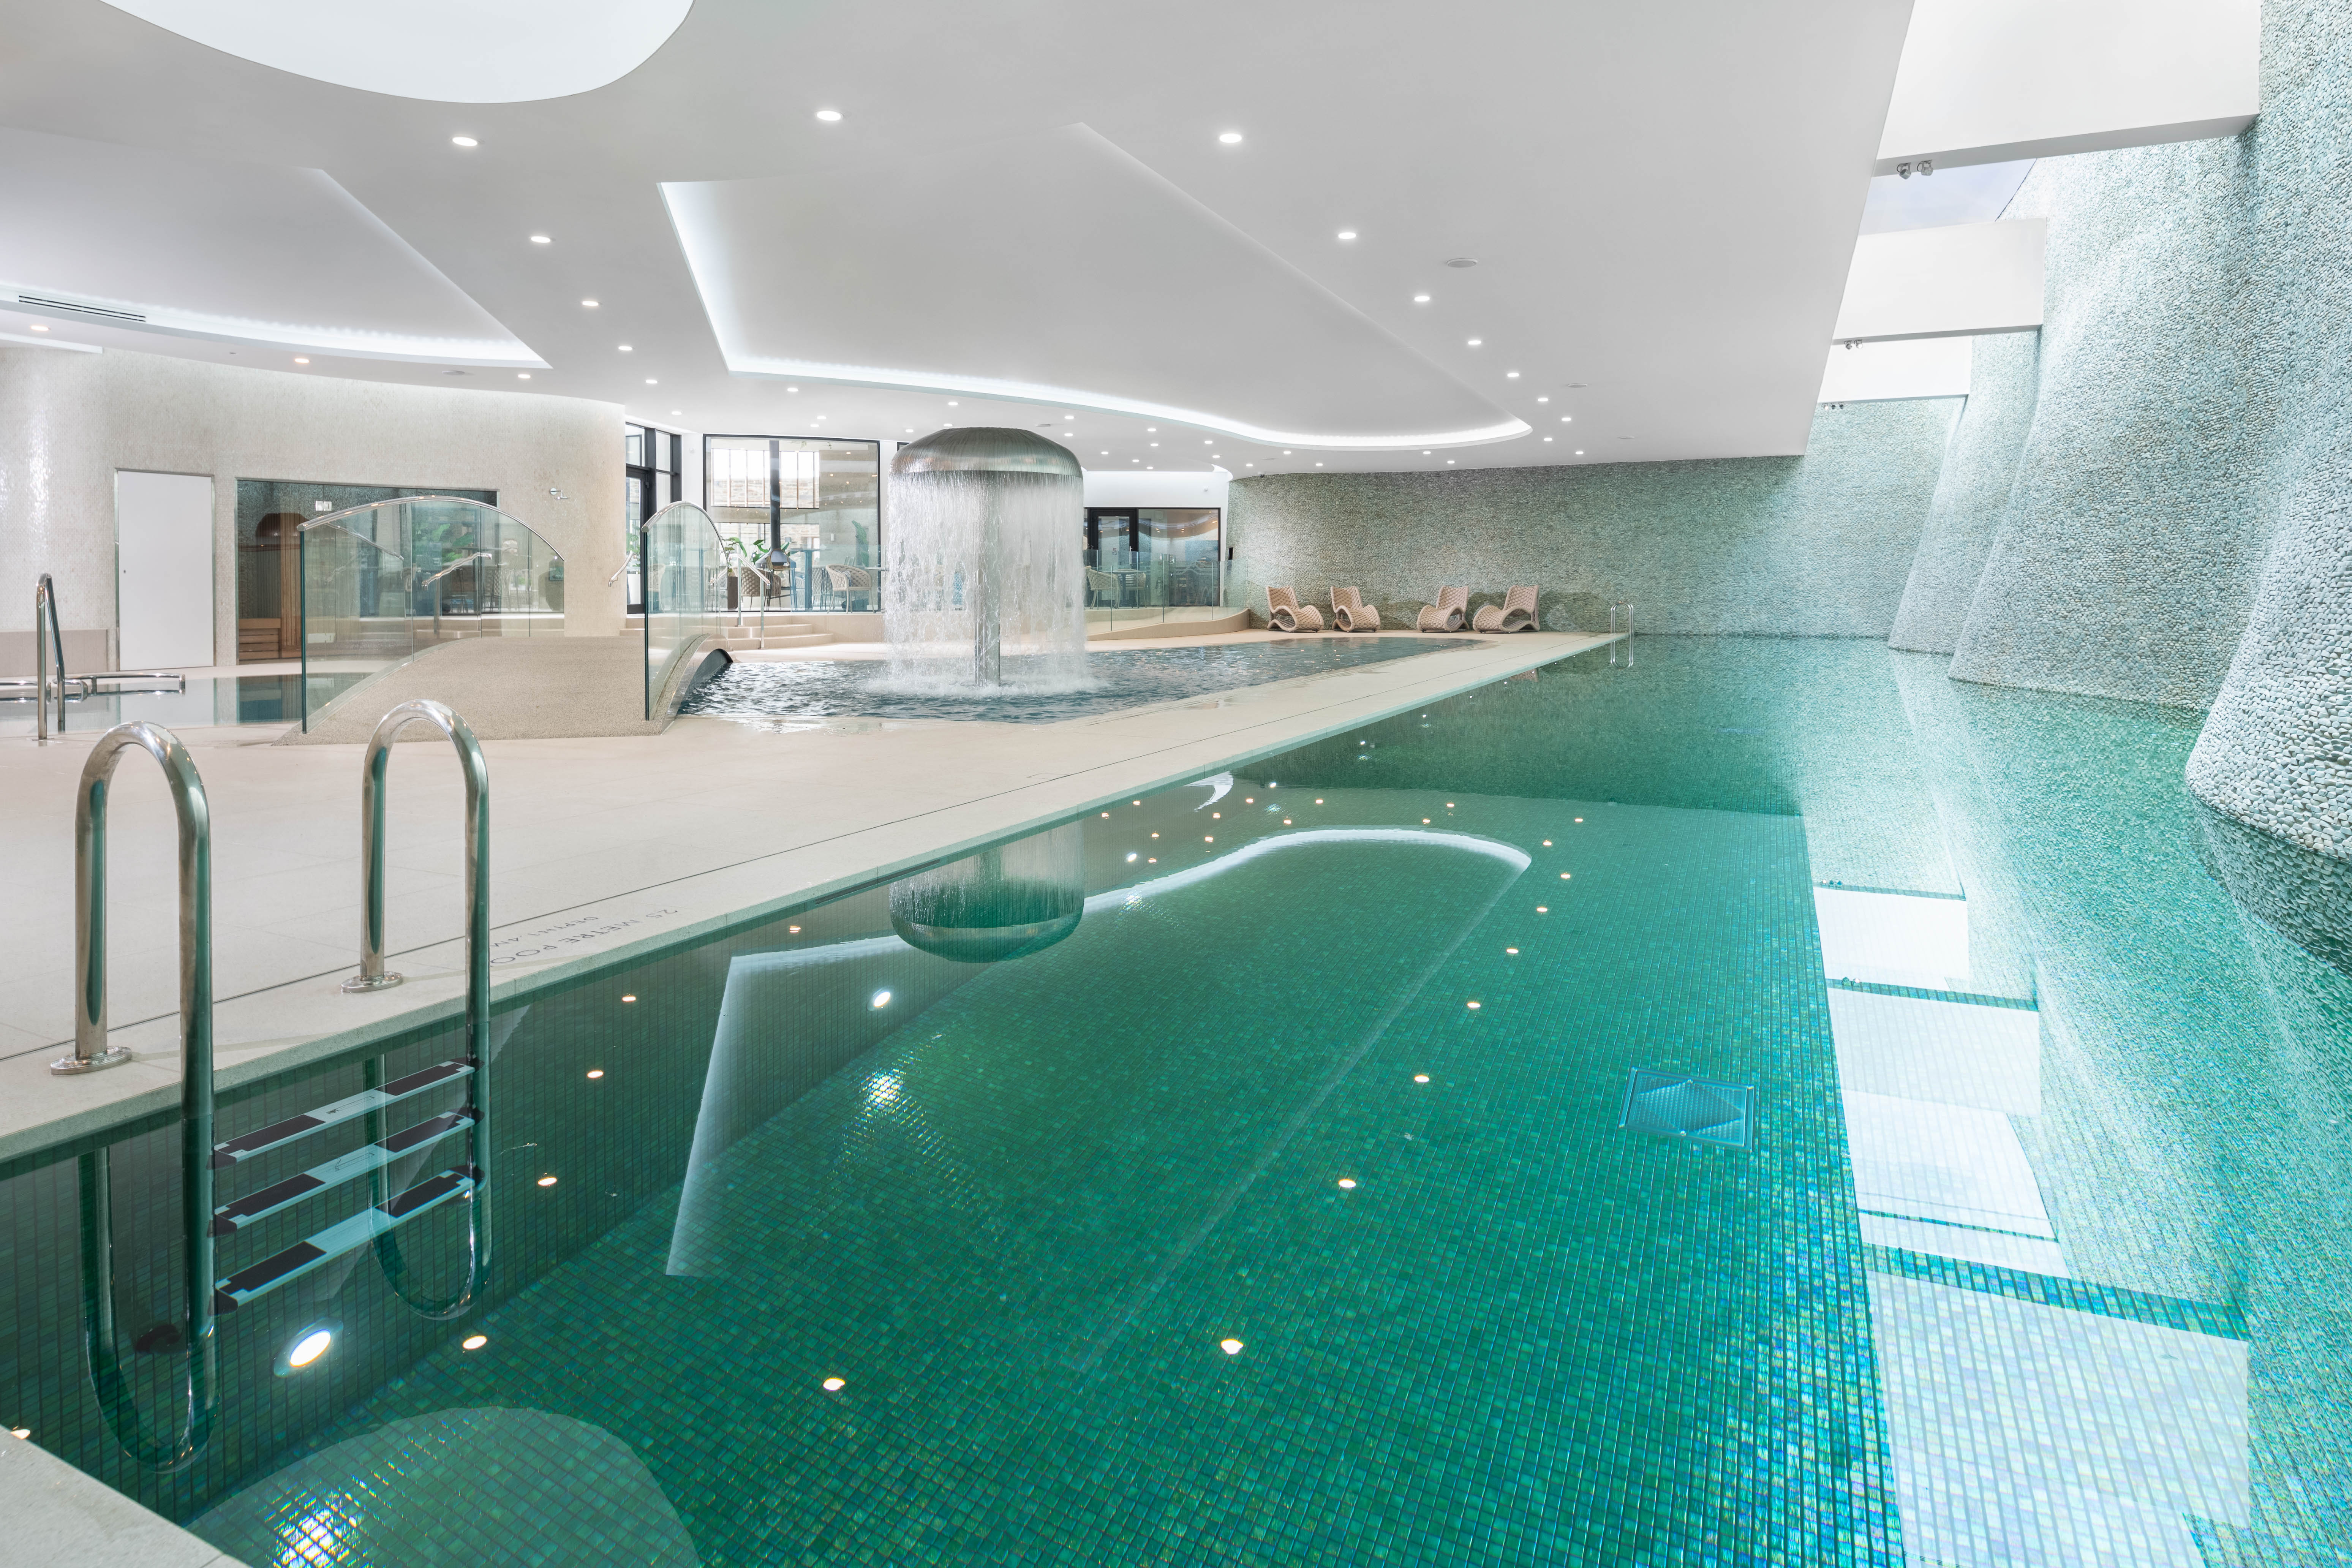 Wade stainless steel linear drainage from Alumasc specified for iconic hotel’s Aqua Club